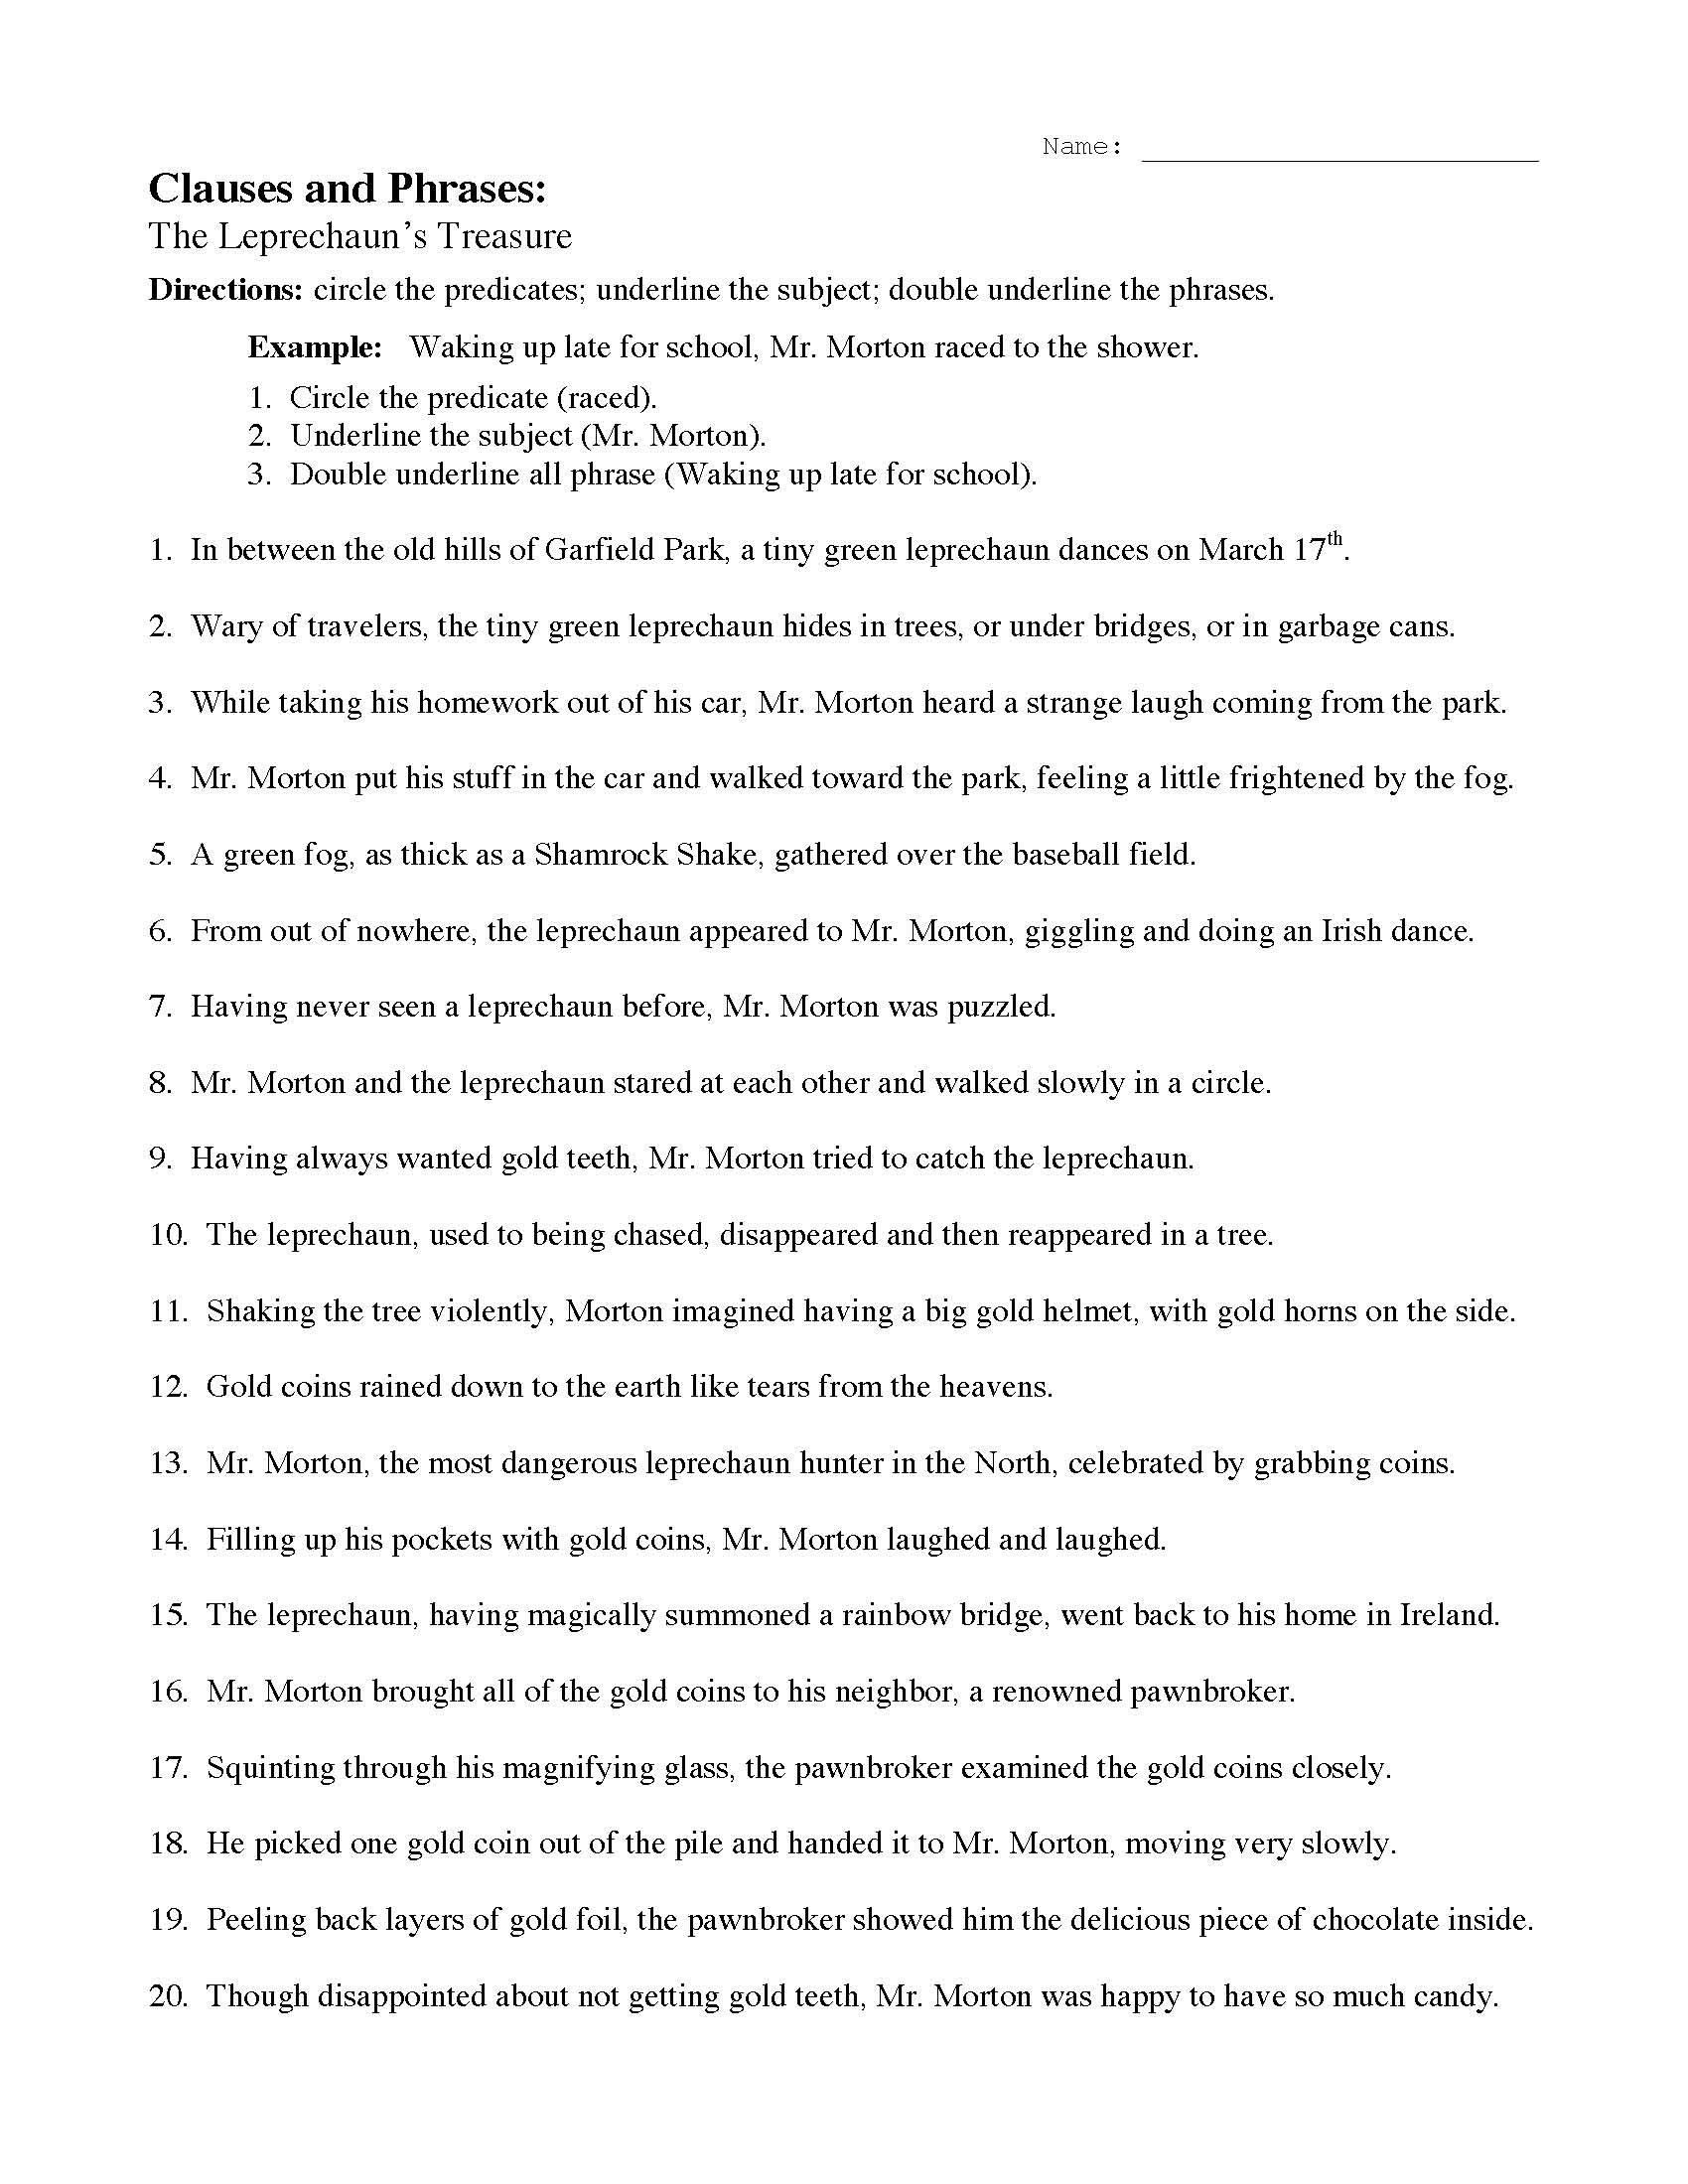 This is a preview image of Clauses and Phrases with Leprechauns Worksheet. Click on it to enlarge it or view the source file.